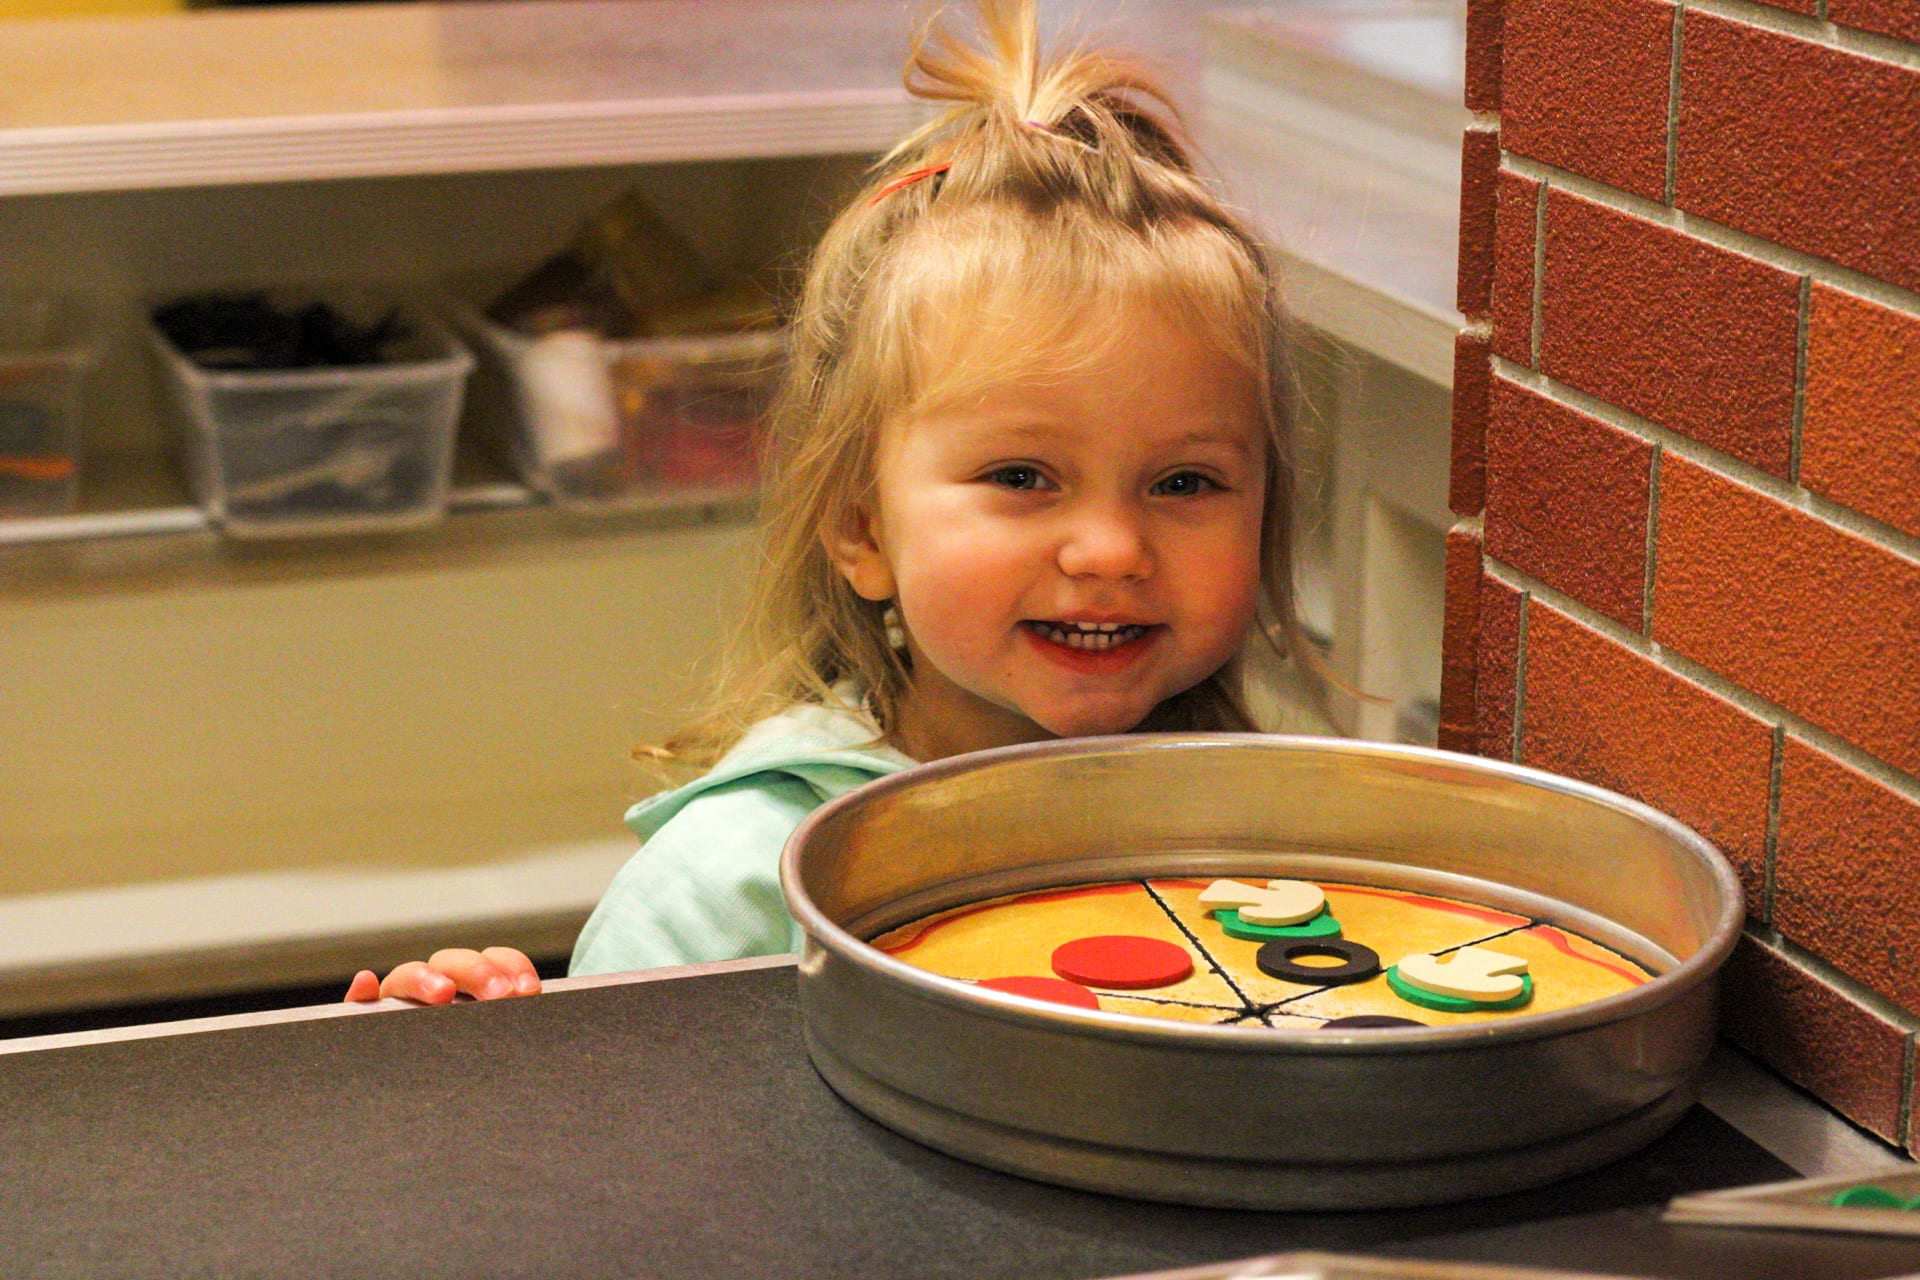 Child making pizza in the cafe exhibit.